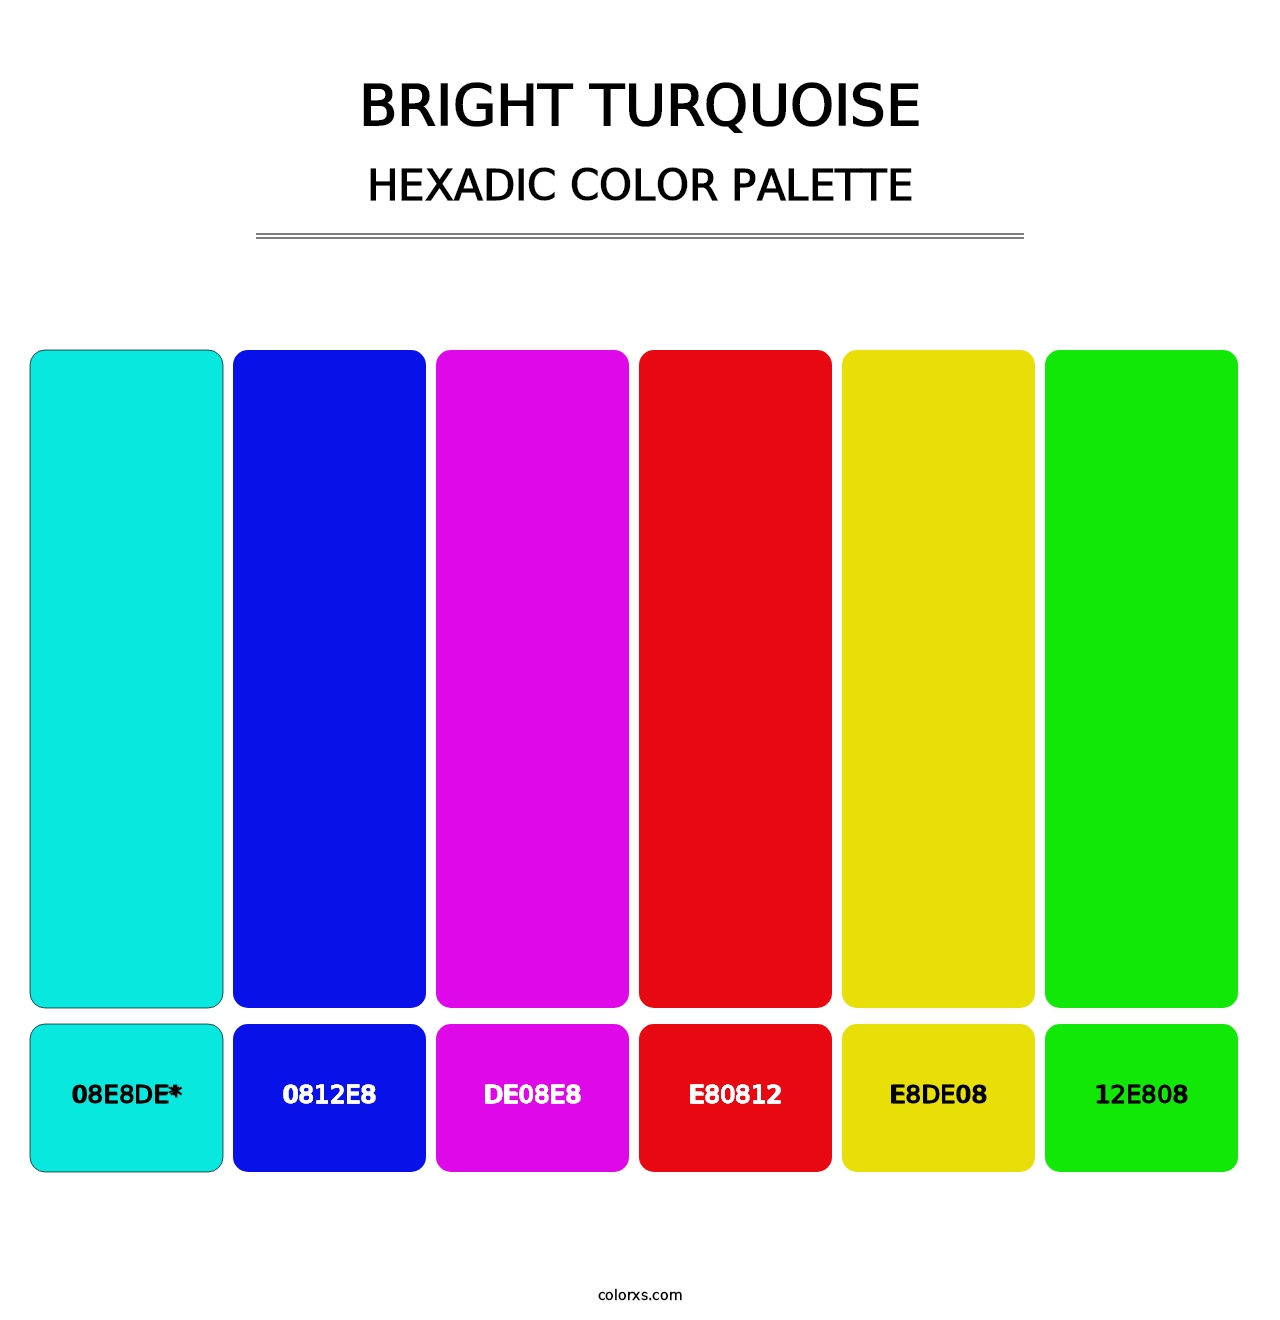 Bright Turquoise - Hexadic Color Palette